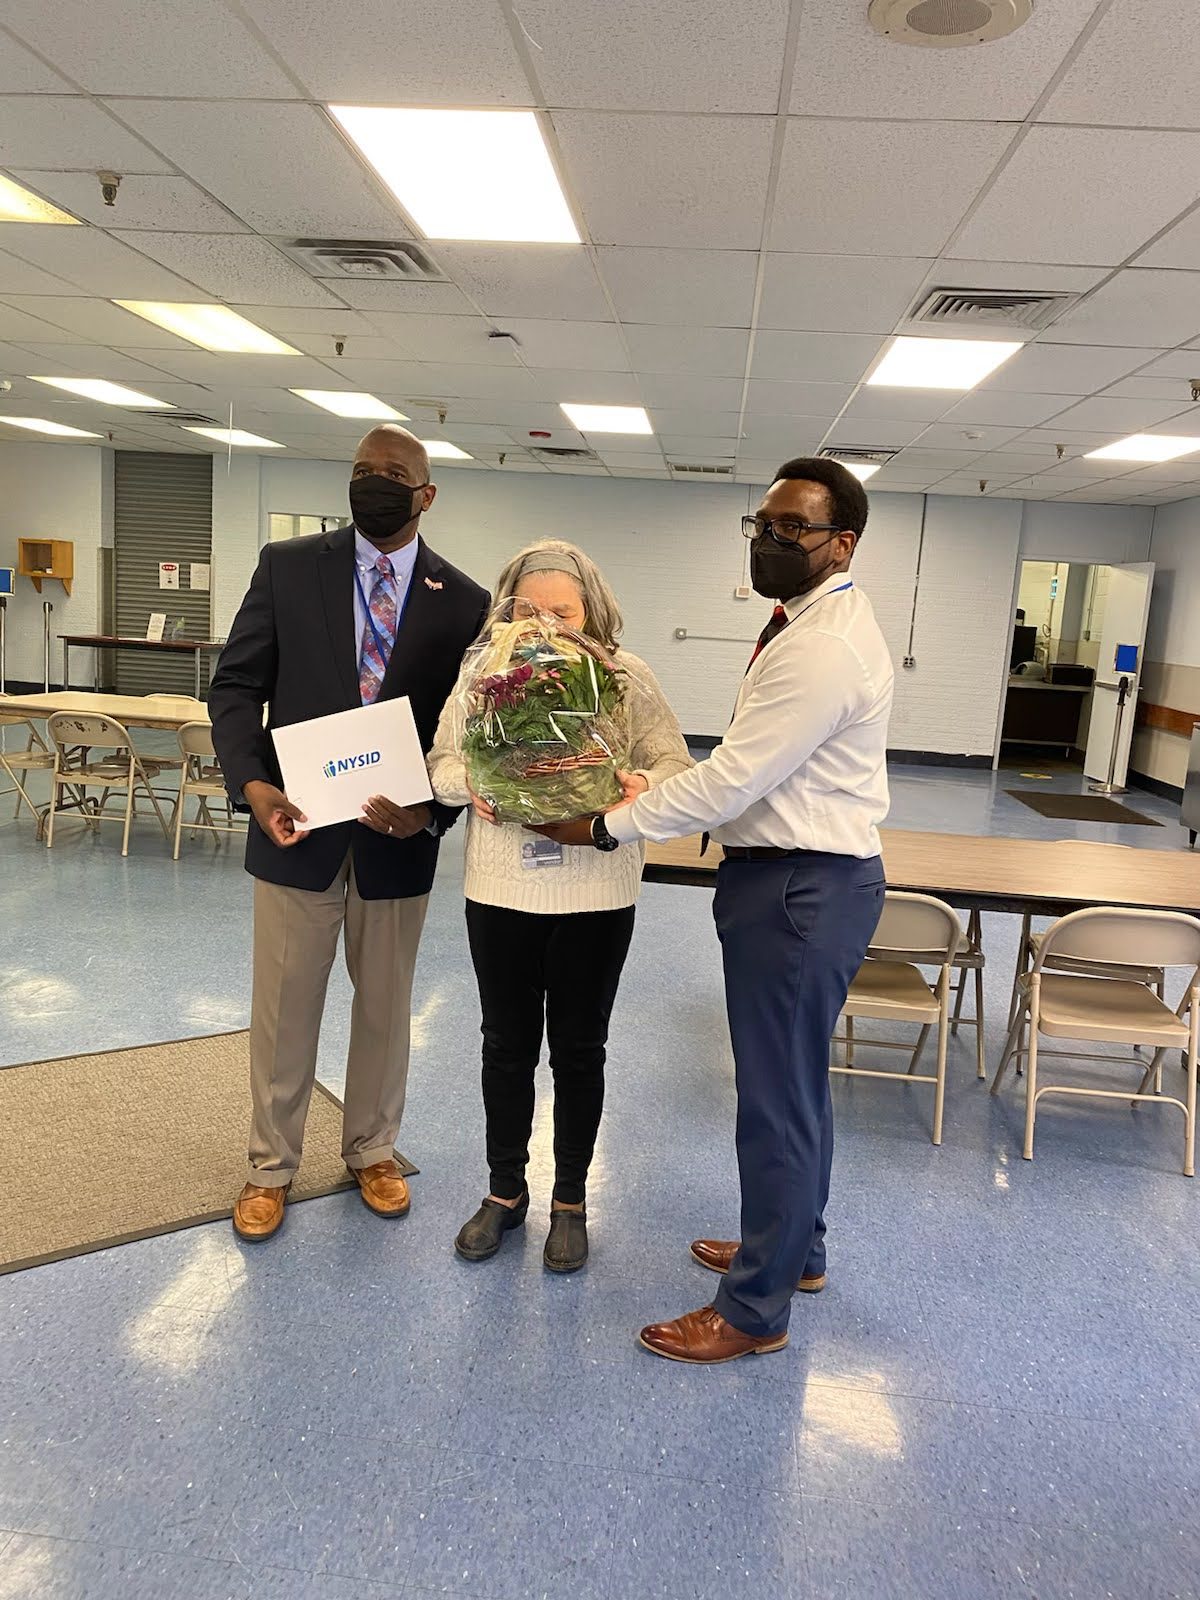 Margaret Baylis with AHRC Nassau Executive Director Stanfort Perry (left) and Employment Services Director Justin Dantzler (right)